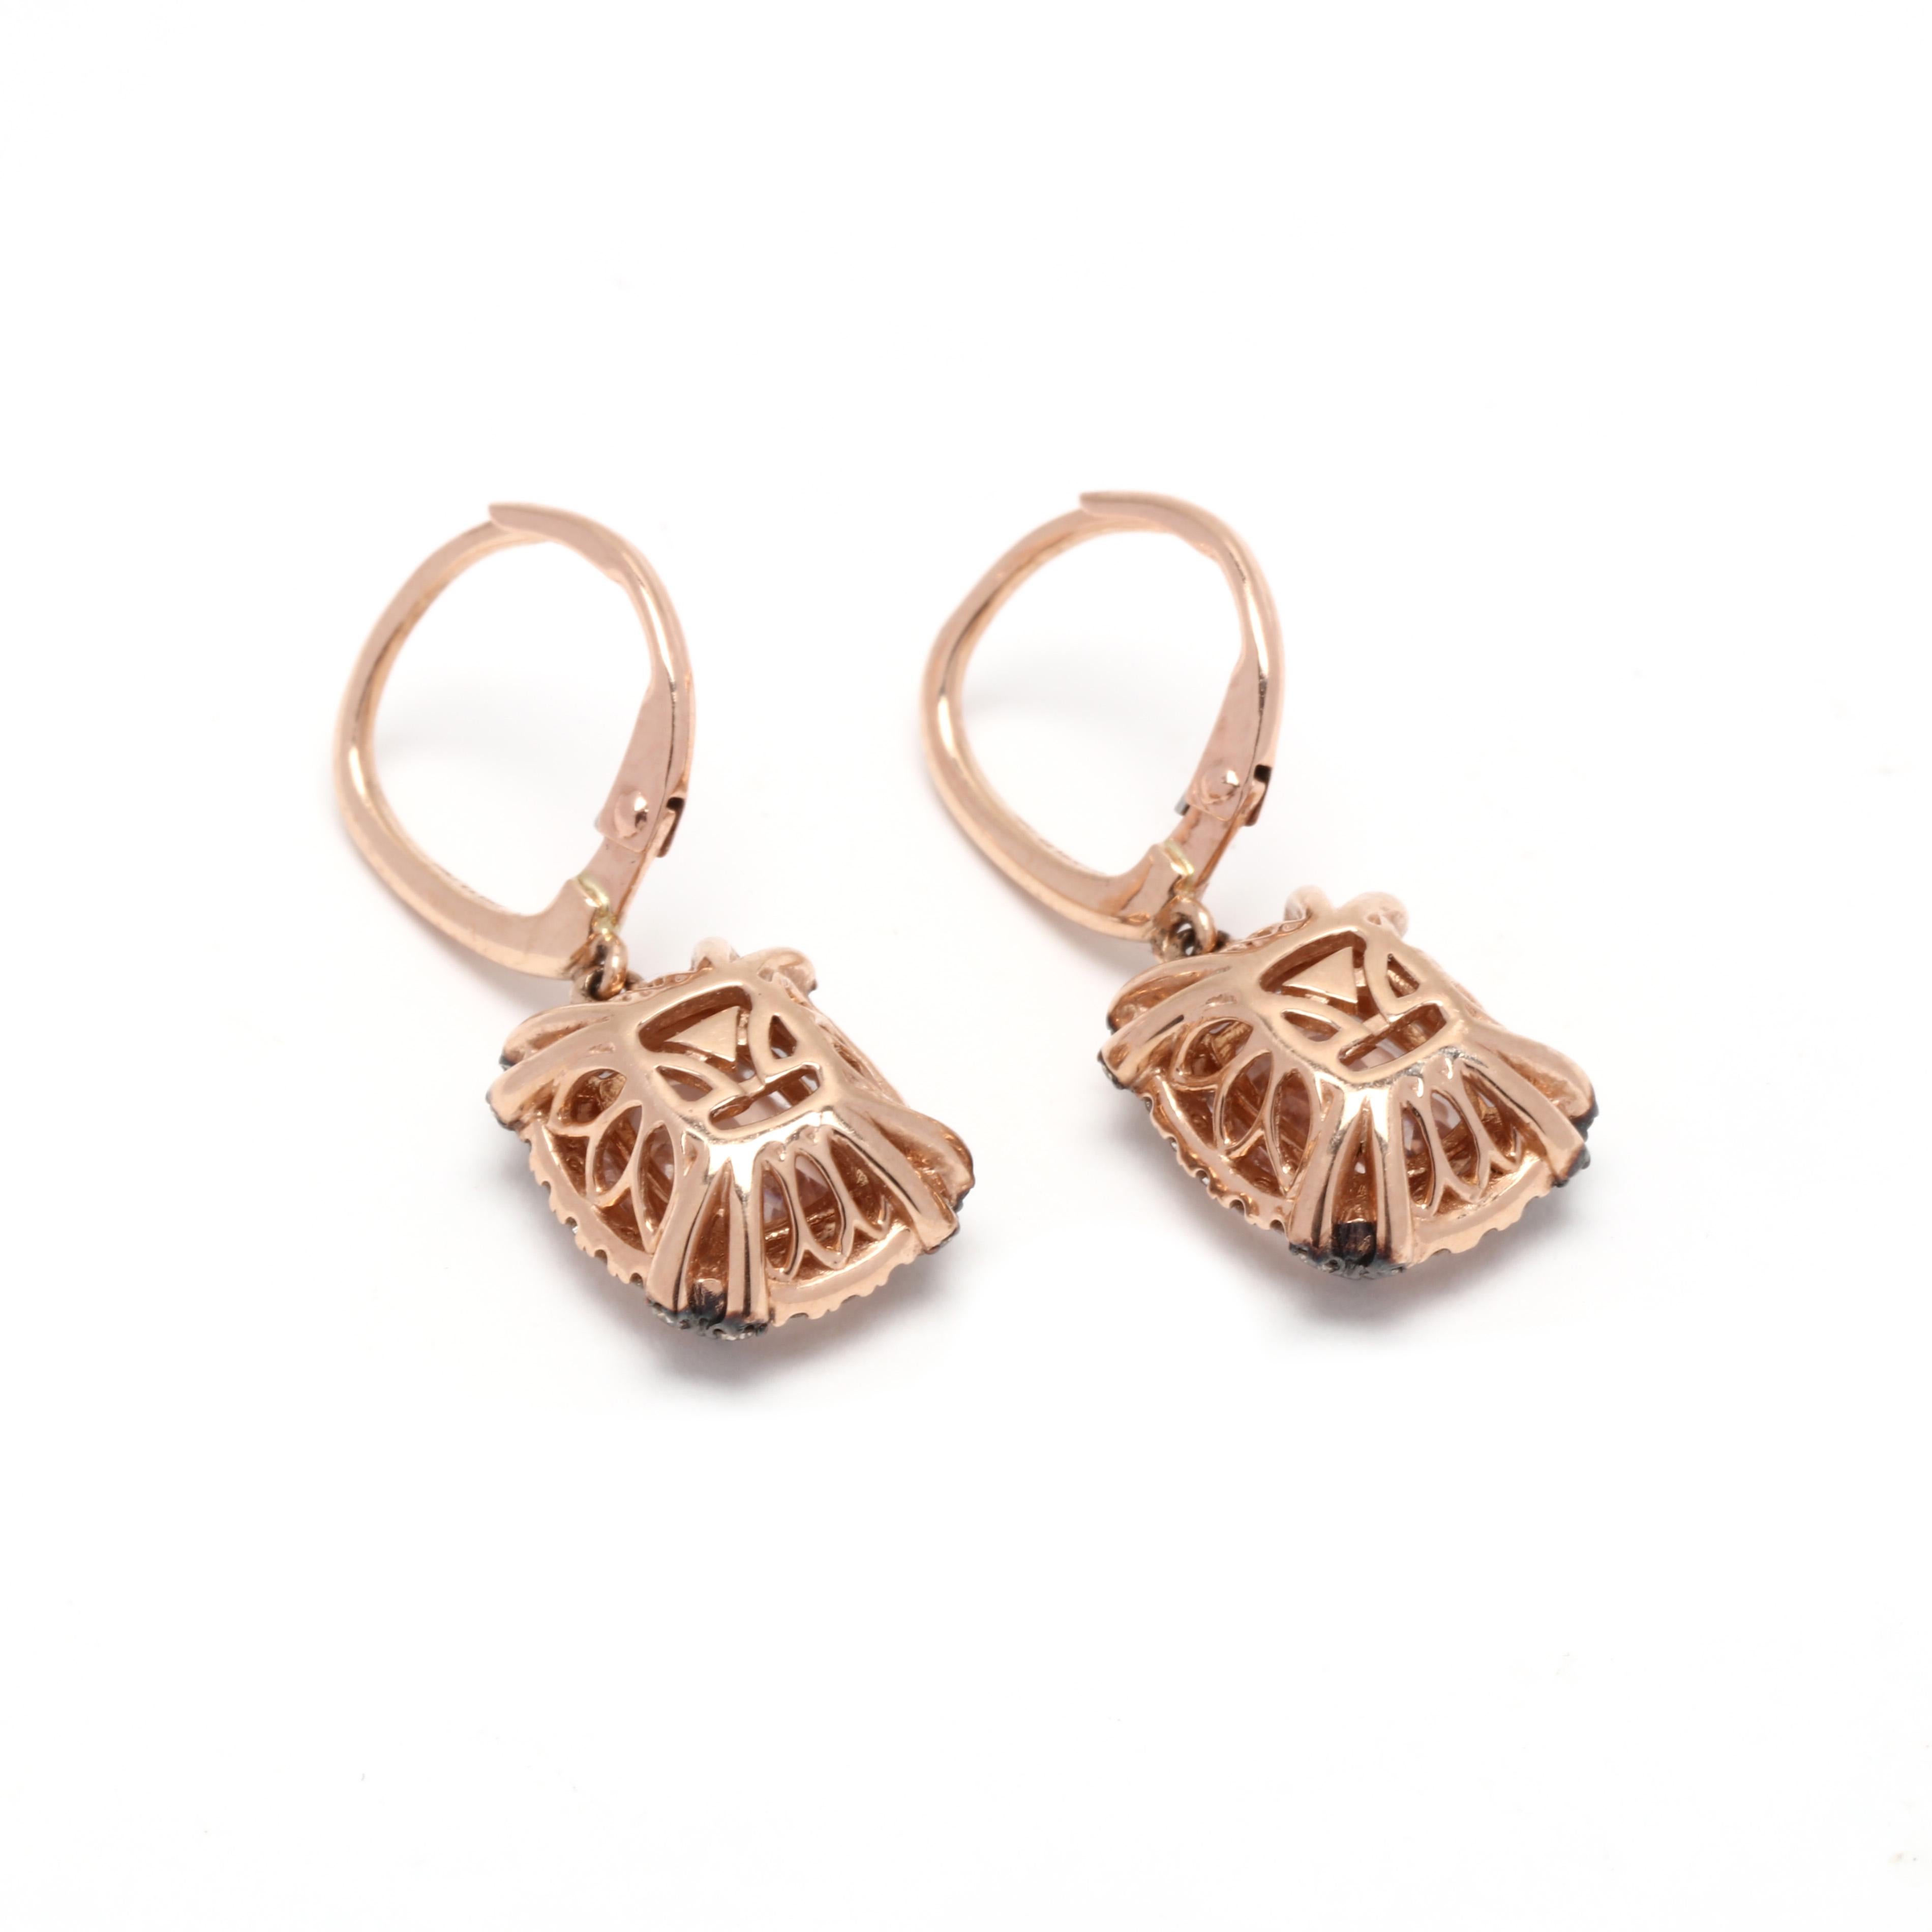 A pair of 14 karat rose gold morganite and diamond dangle earrings designed by LeVian. These earrings feature prong set, rectangular cushion cut morganite stones weighing approximately 3 total carats surrounded by a halo of chocolate and white